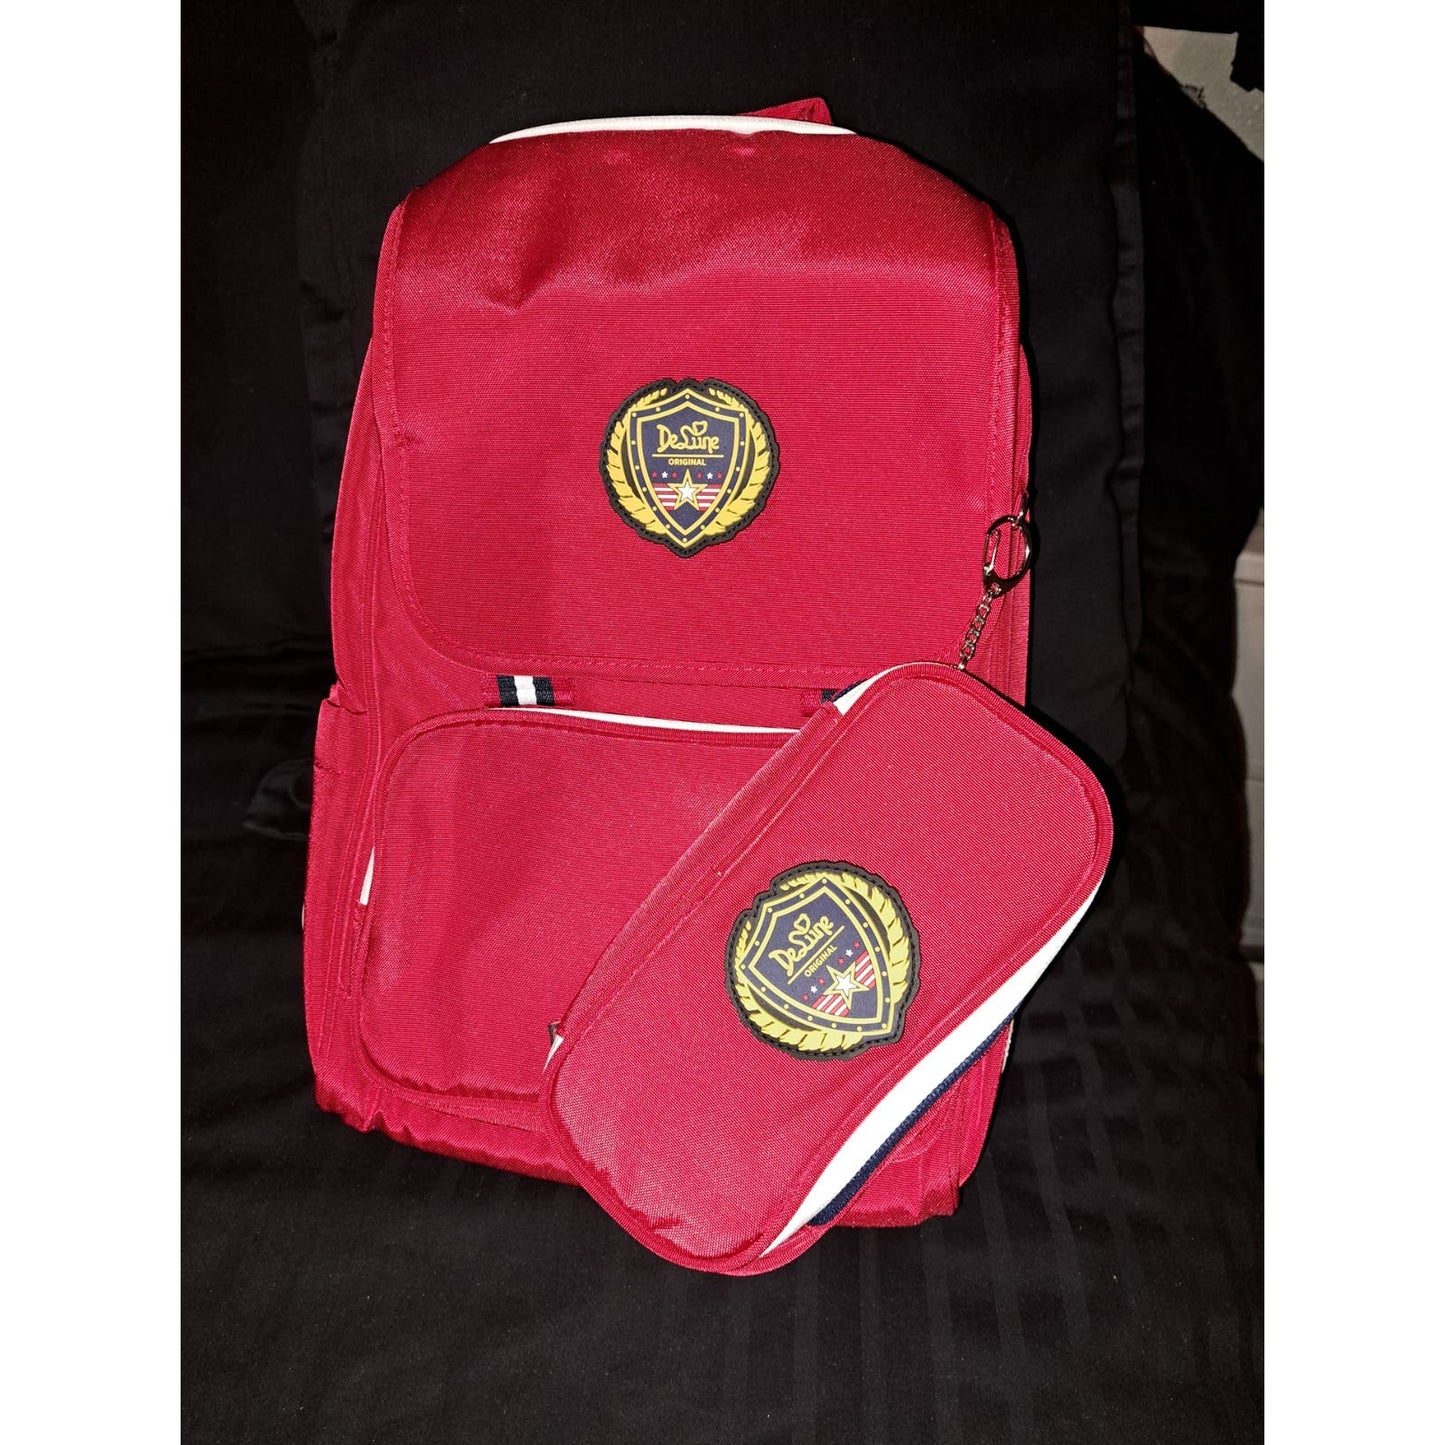 SALE!!! NIB -Kids BACKPACK orthopedic European Delune RED with Pencil case